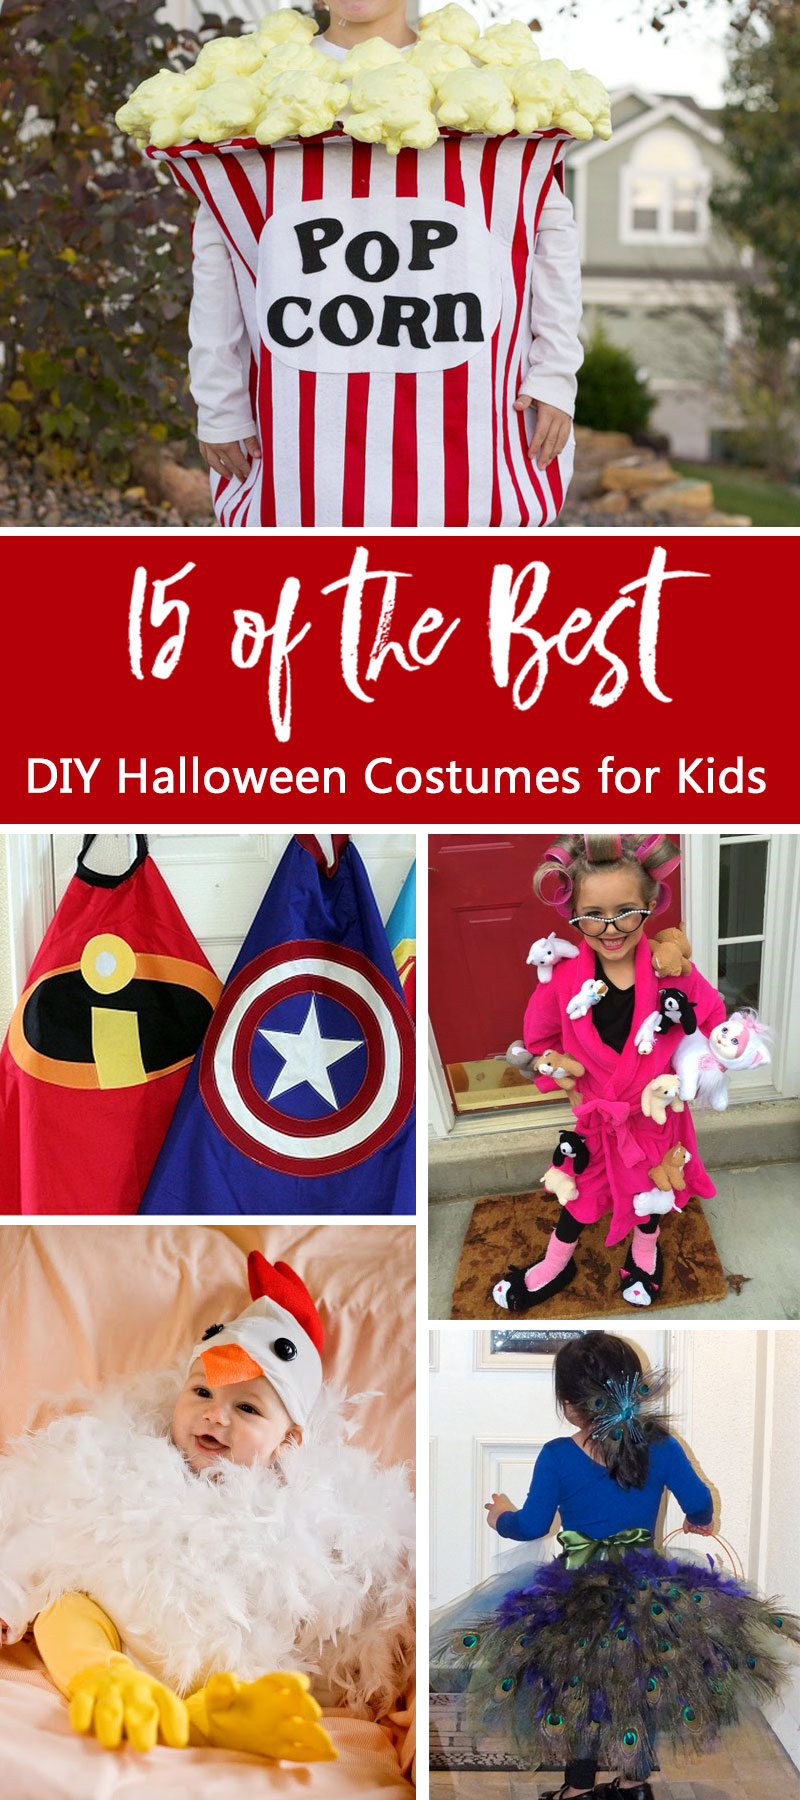 We've found 15 of the Best DIY Halloween Costumes for Kids that would be easy for you to make and your kids will look great Trick or Treating in them on Halloween. You are going to have a hard time deciding which of these Homemade Halloween Costumes to make. Pin these easy to make Kid's Halloween Costume Ideas for later and follow us for more Halloween Costume Ideas. 